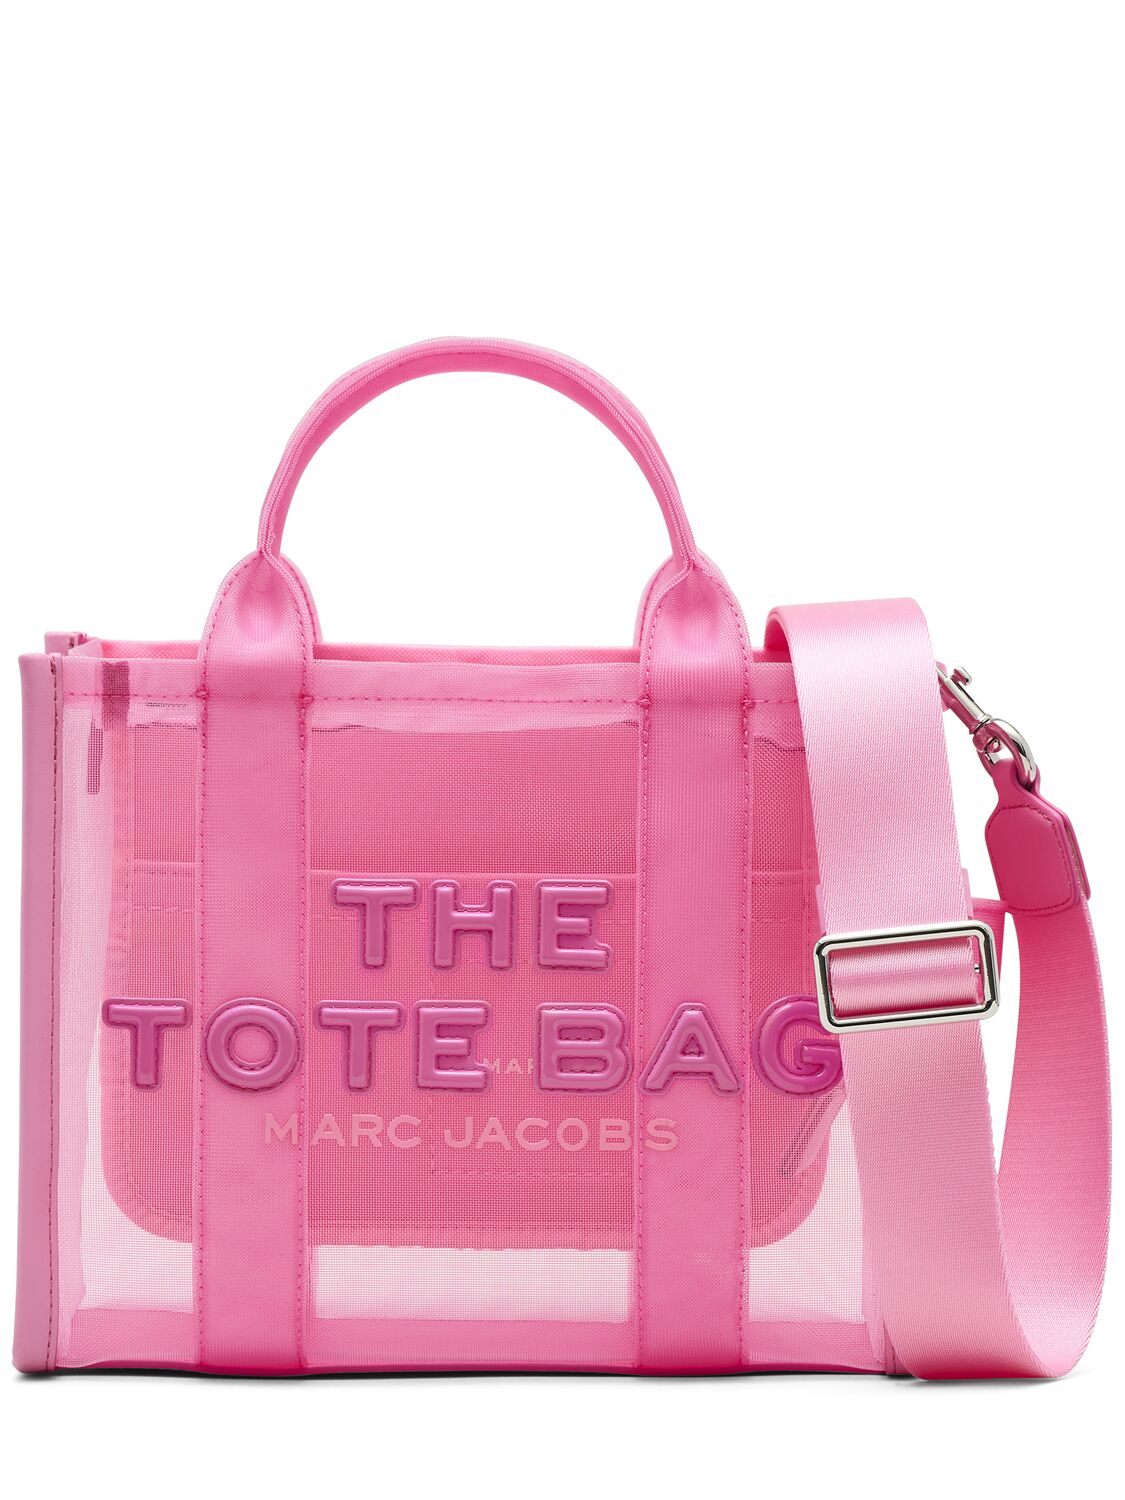 Marc Jacobs The Small Tote尼龙手提包 In Pink